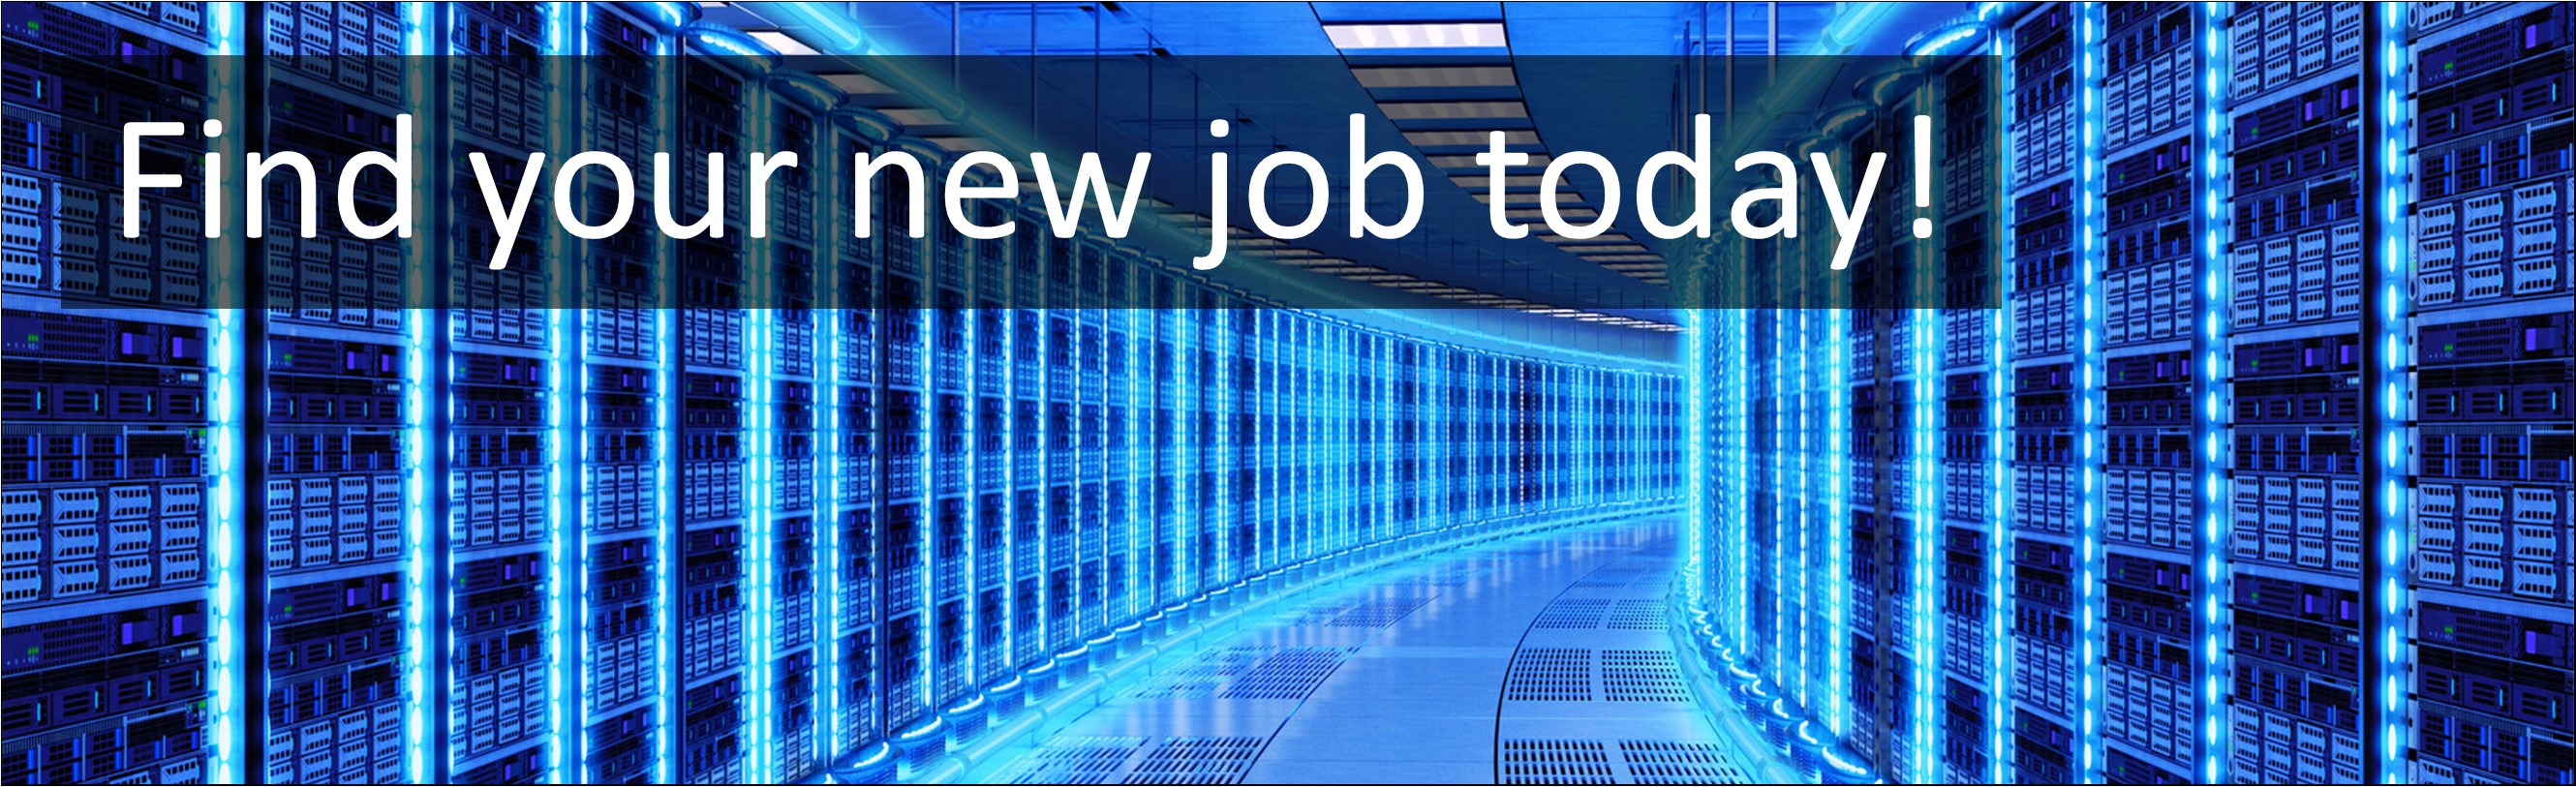 IT & Communication Jobs. First & Second Line Support Engineer / IT Helpdesk /Technical Service Desk Technician Jobs, Careers & Vacancies in London Advertised by AWD online – Multi-Job Board Advertising and CV Sourcing Recruitment Services